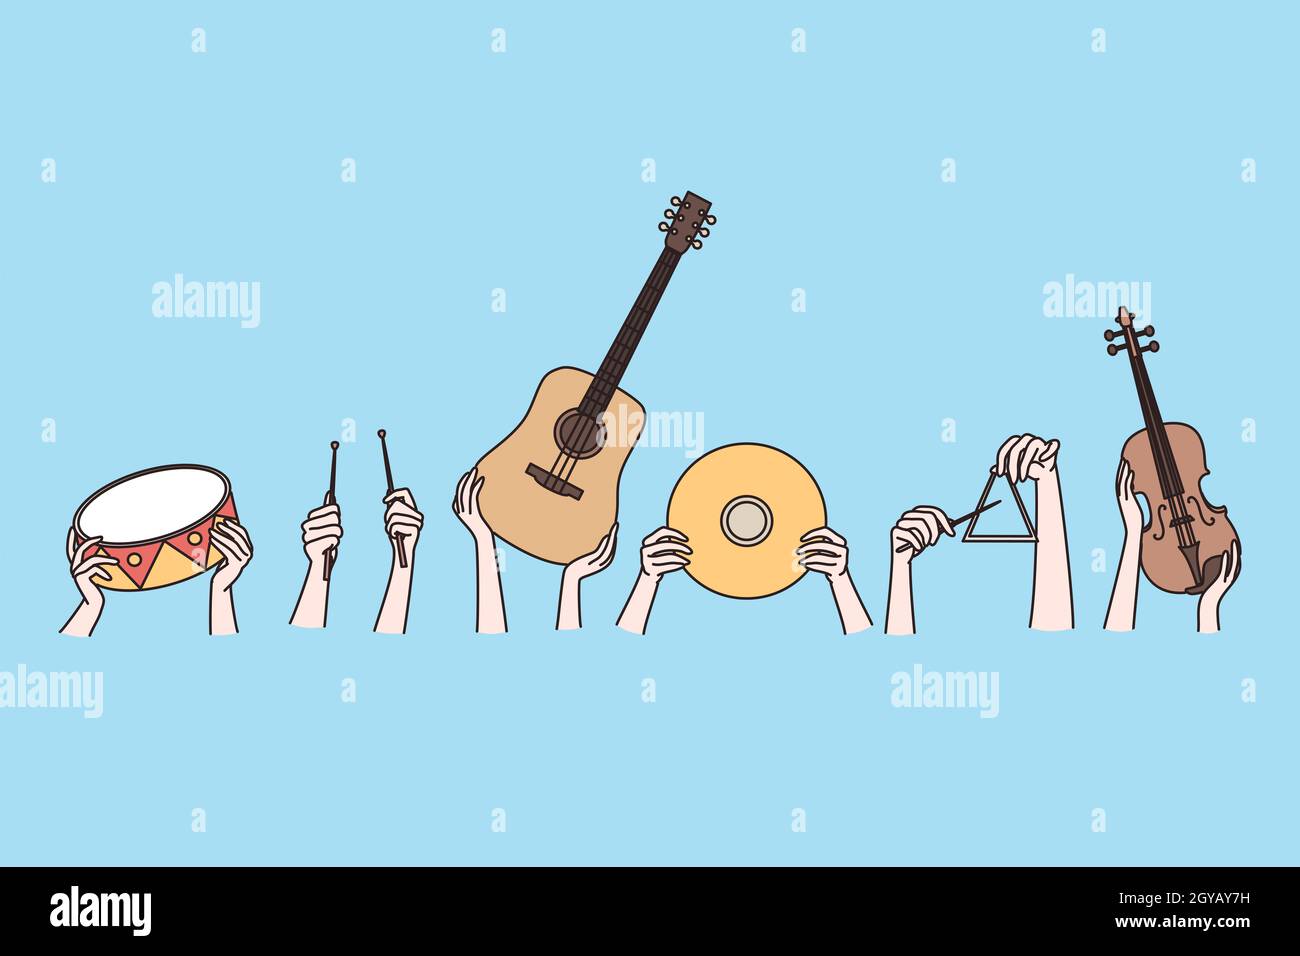 Musical instruments and creative arts concept. Human hands holding musical instruments guitar violin drums teangle over blue background vector illustr Stock Photo